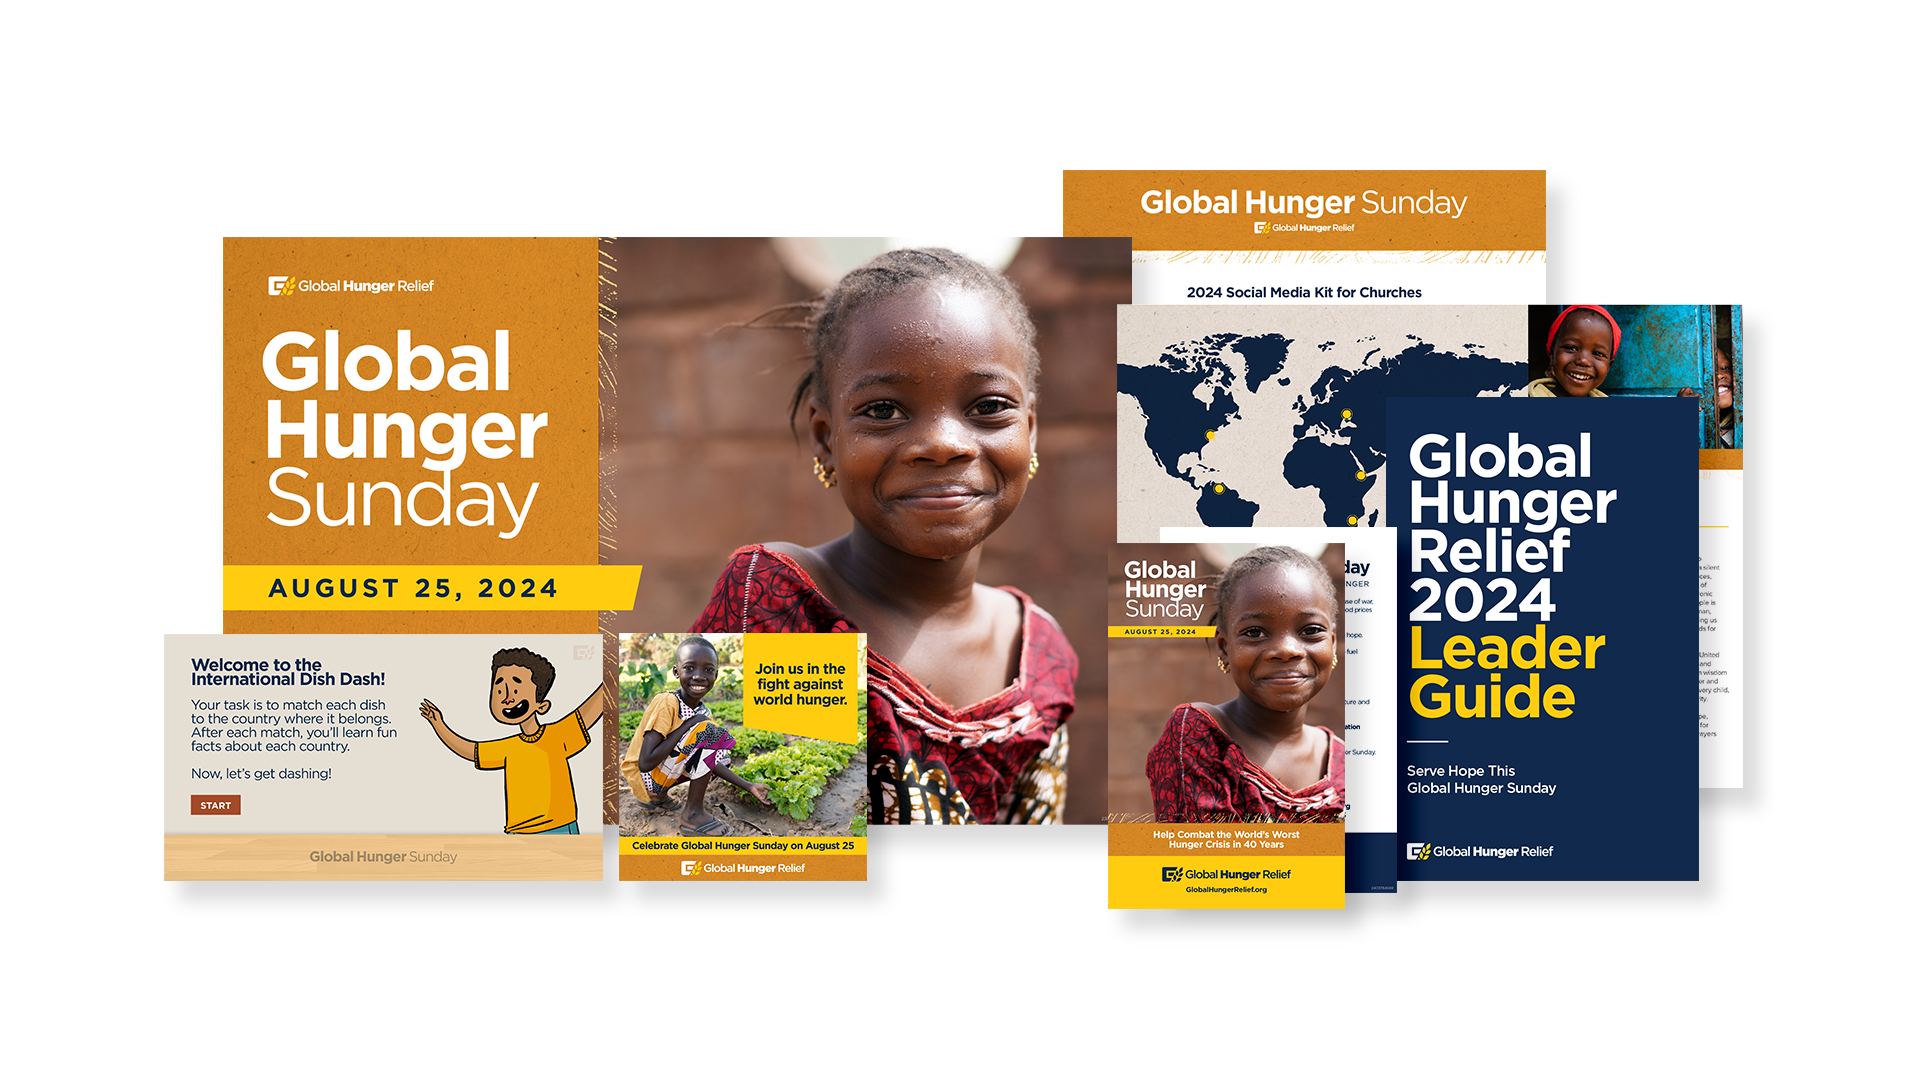 GHR_Global Hunger Sunday 2024_Resource Collage